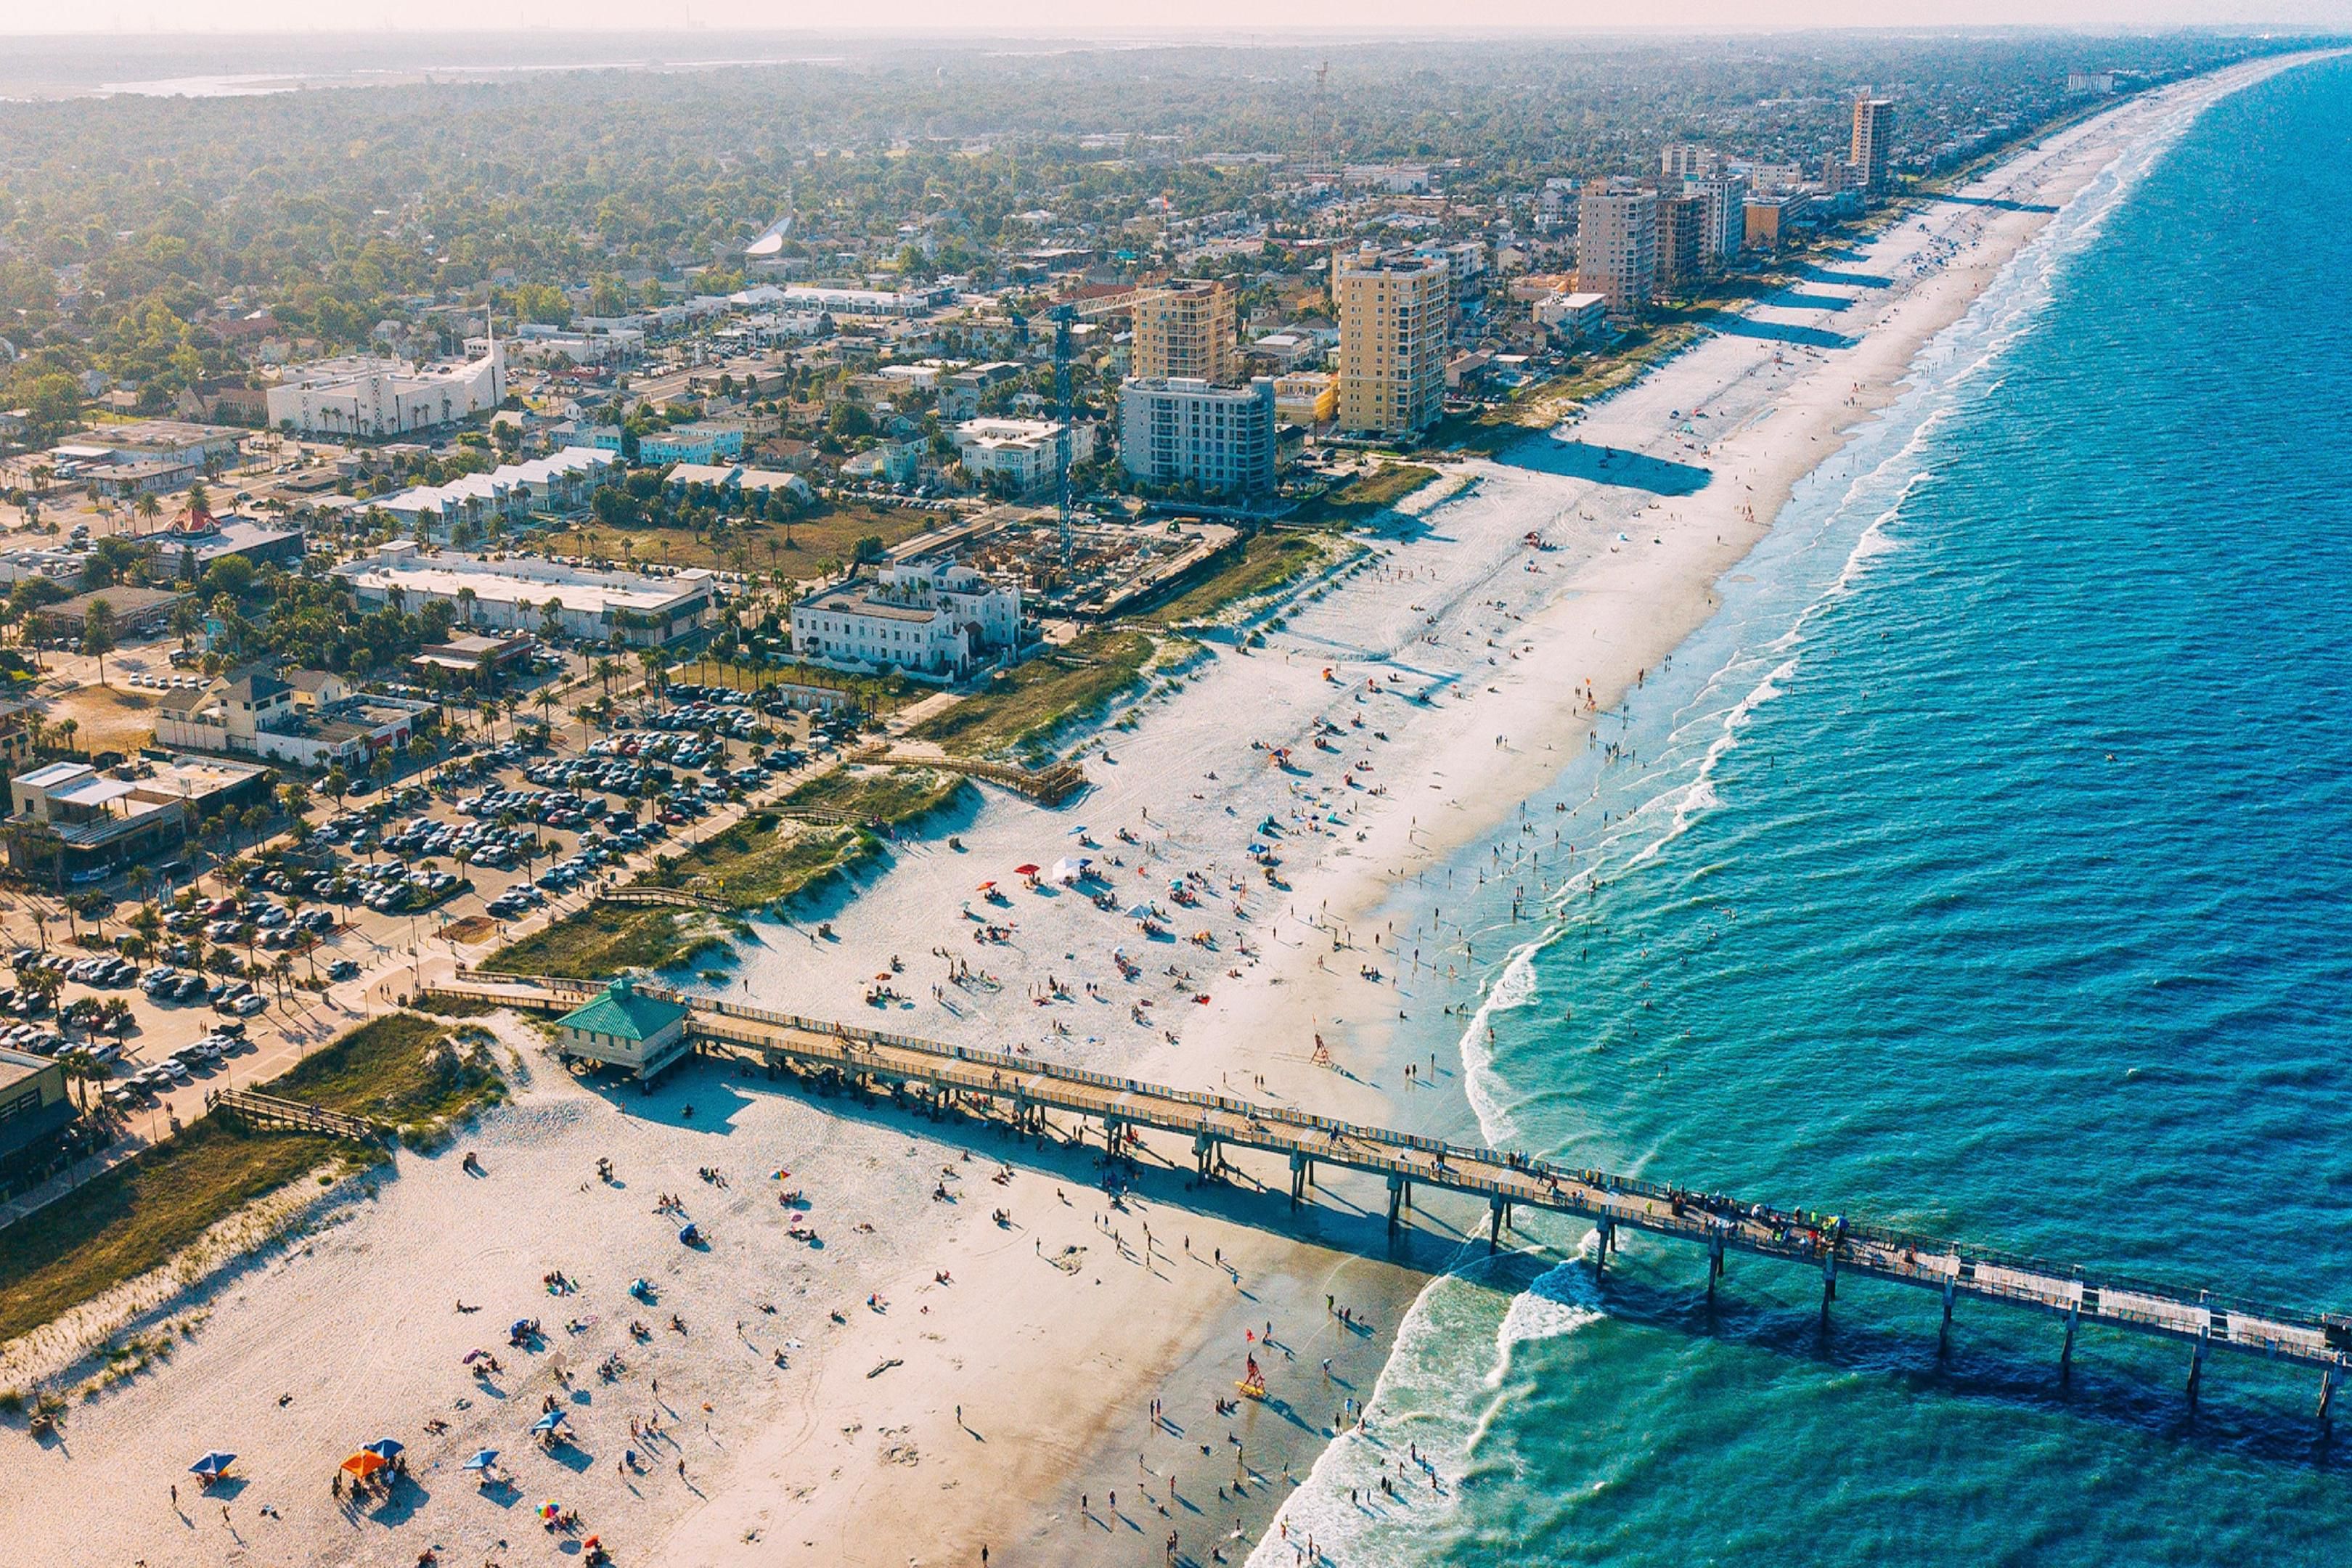 Jacksonville is home to 22 miles of beautiful white sand beaches.